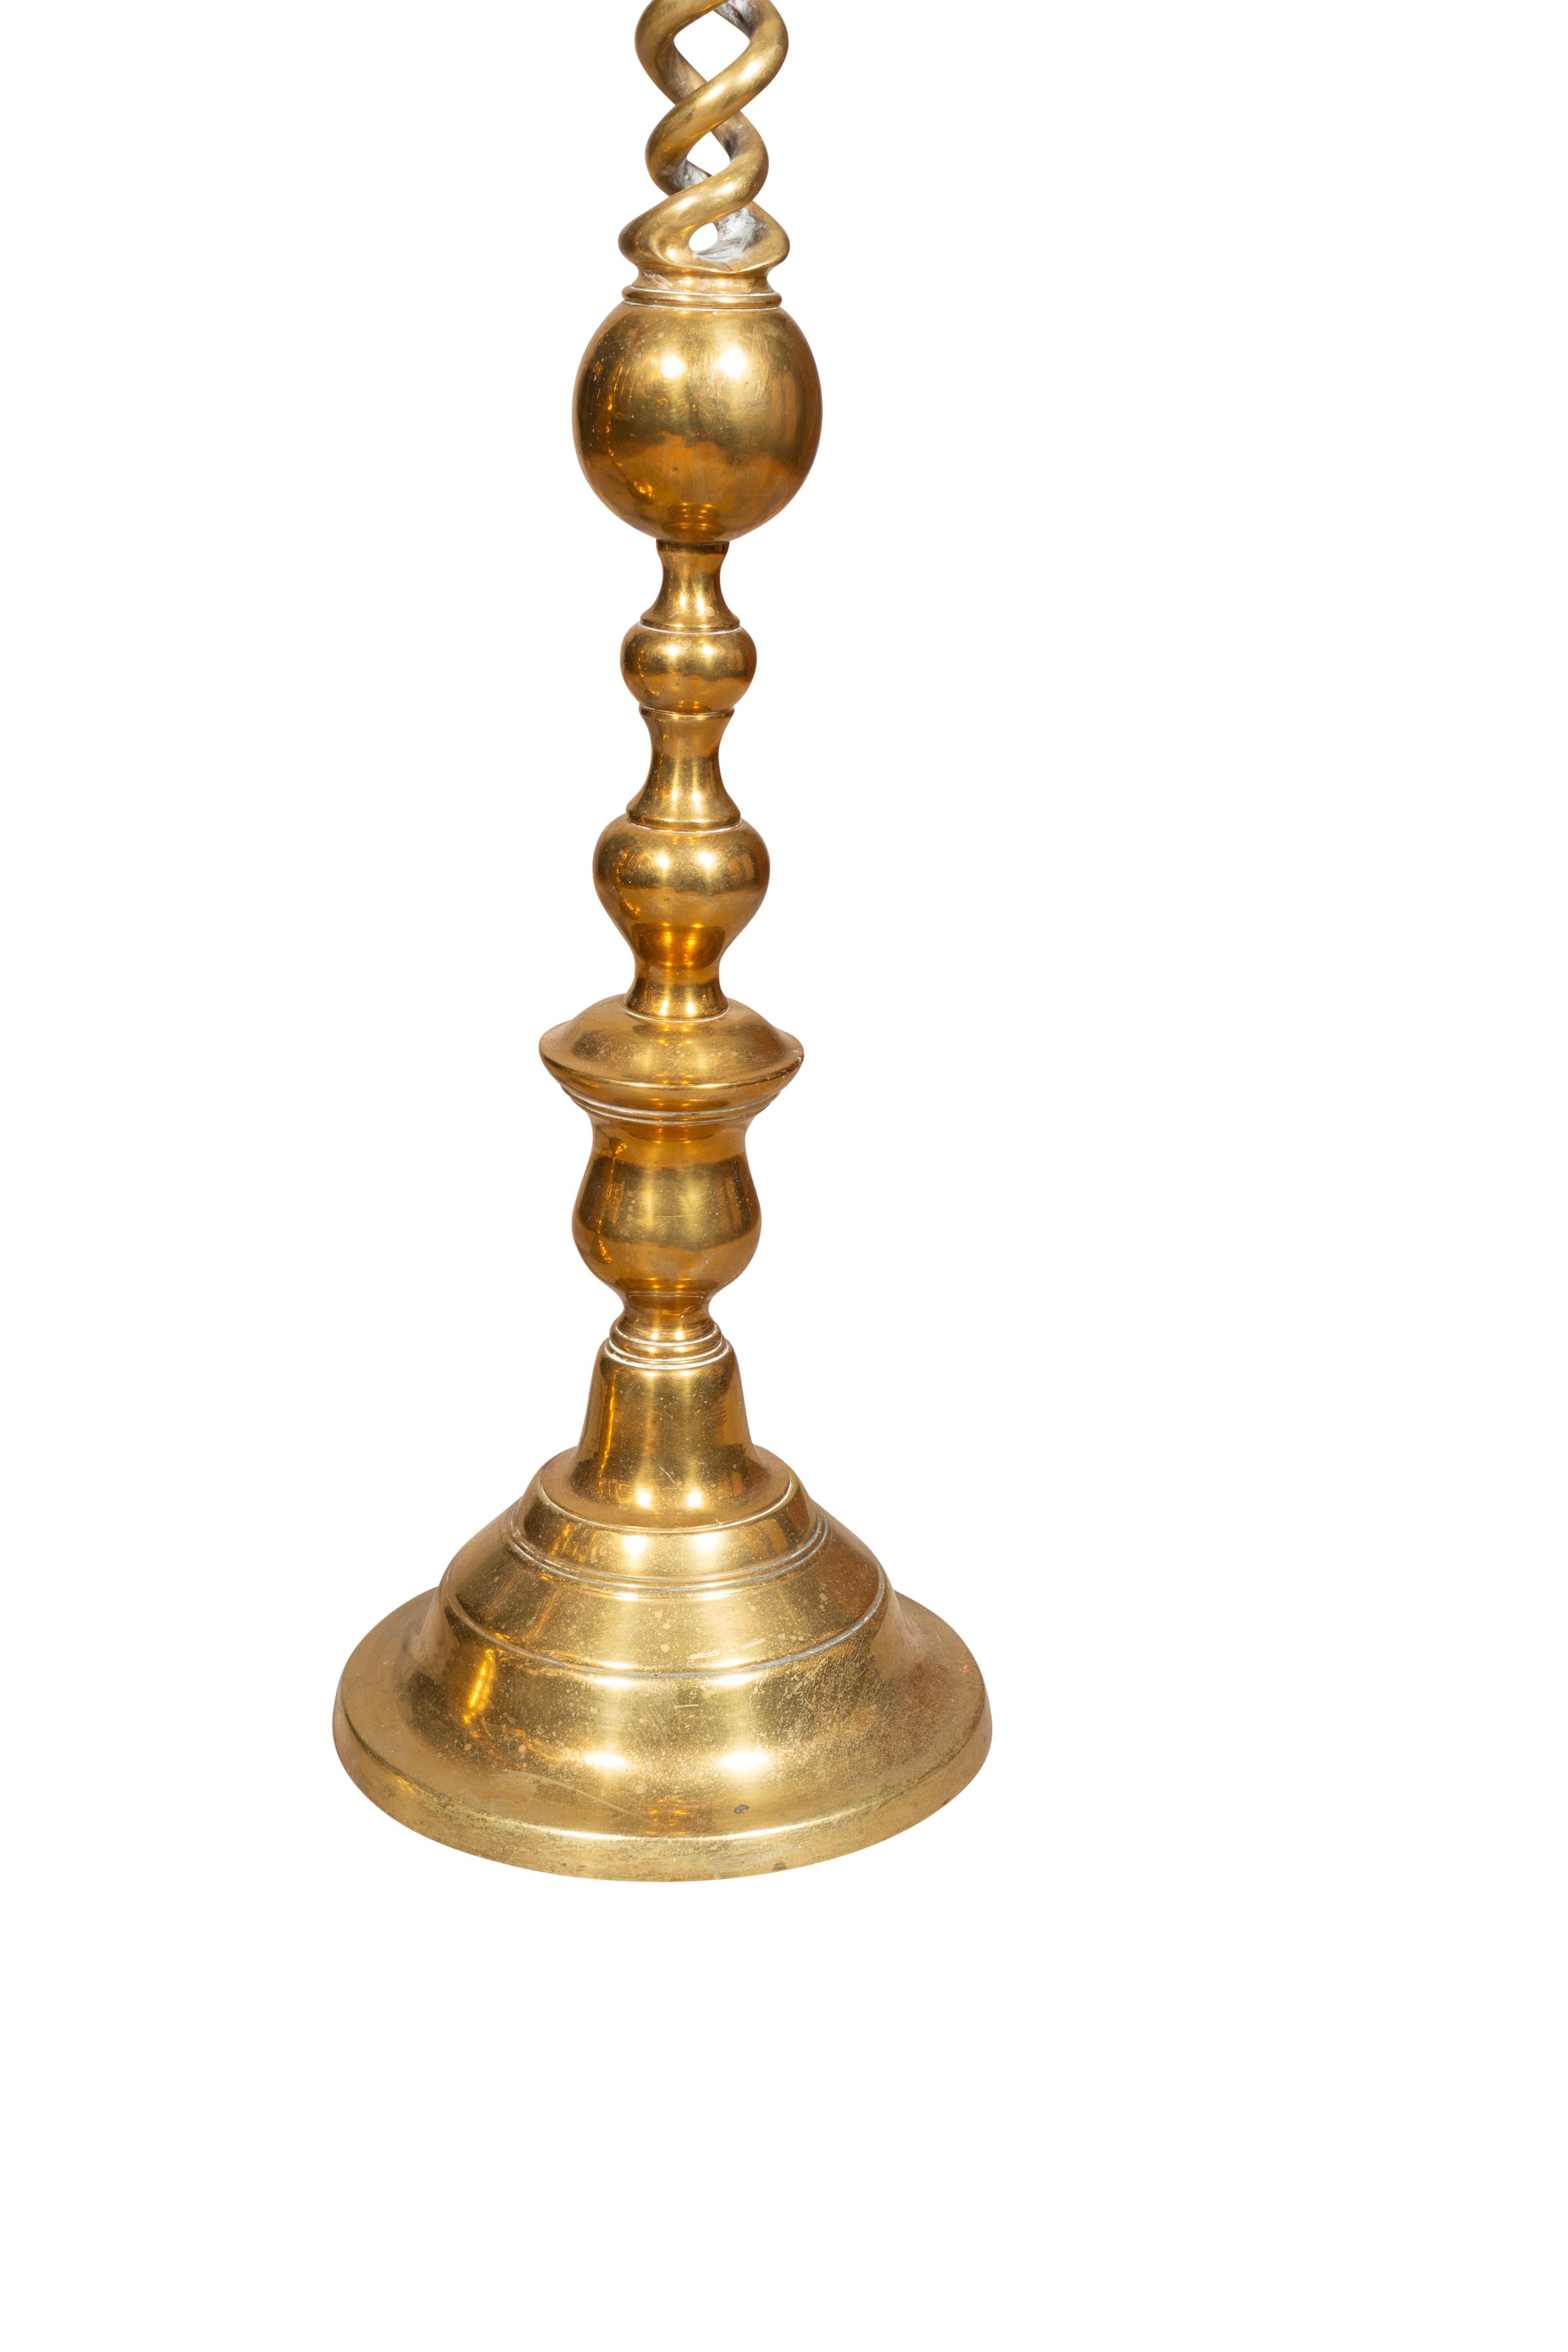 Can be used as floor candlesticks. Spiral twist with circular domed base. From the estate of the founder of Yankee Candle Company.